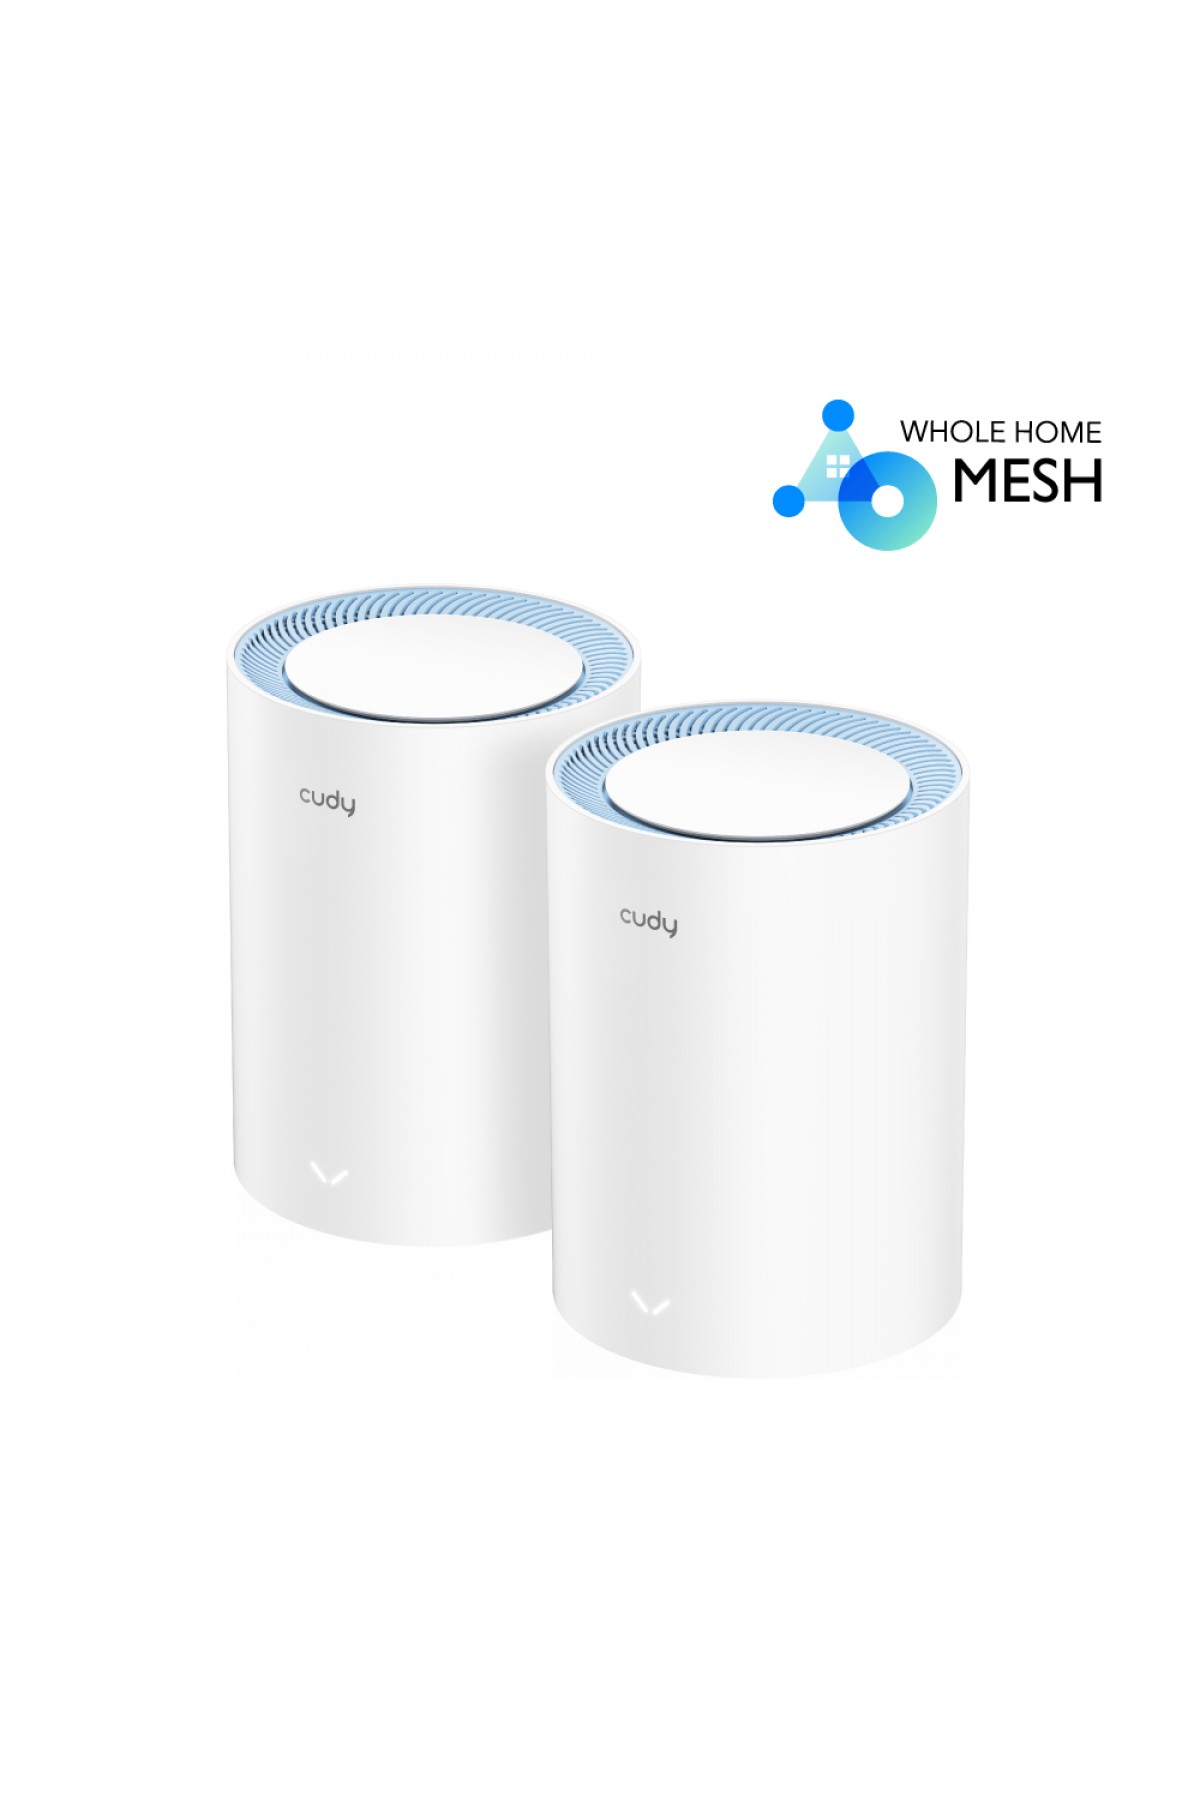 AC1200 Dual Band Whole Home Wi-Fi Mesh System, Model: M1200 2-pack